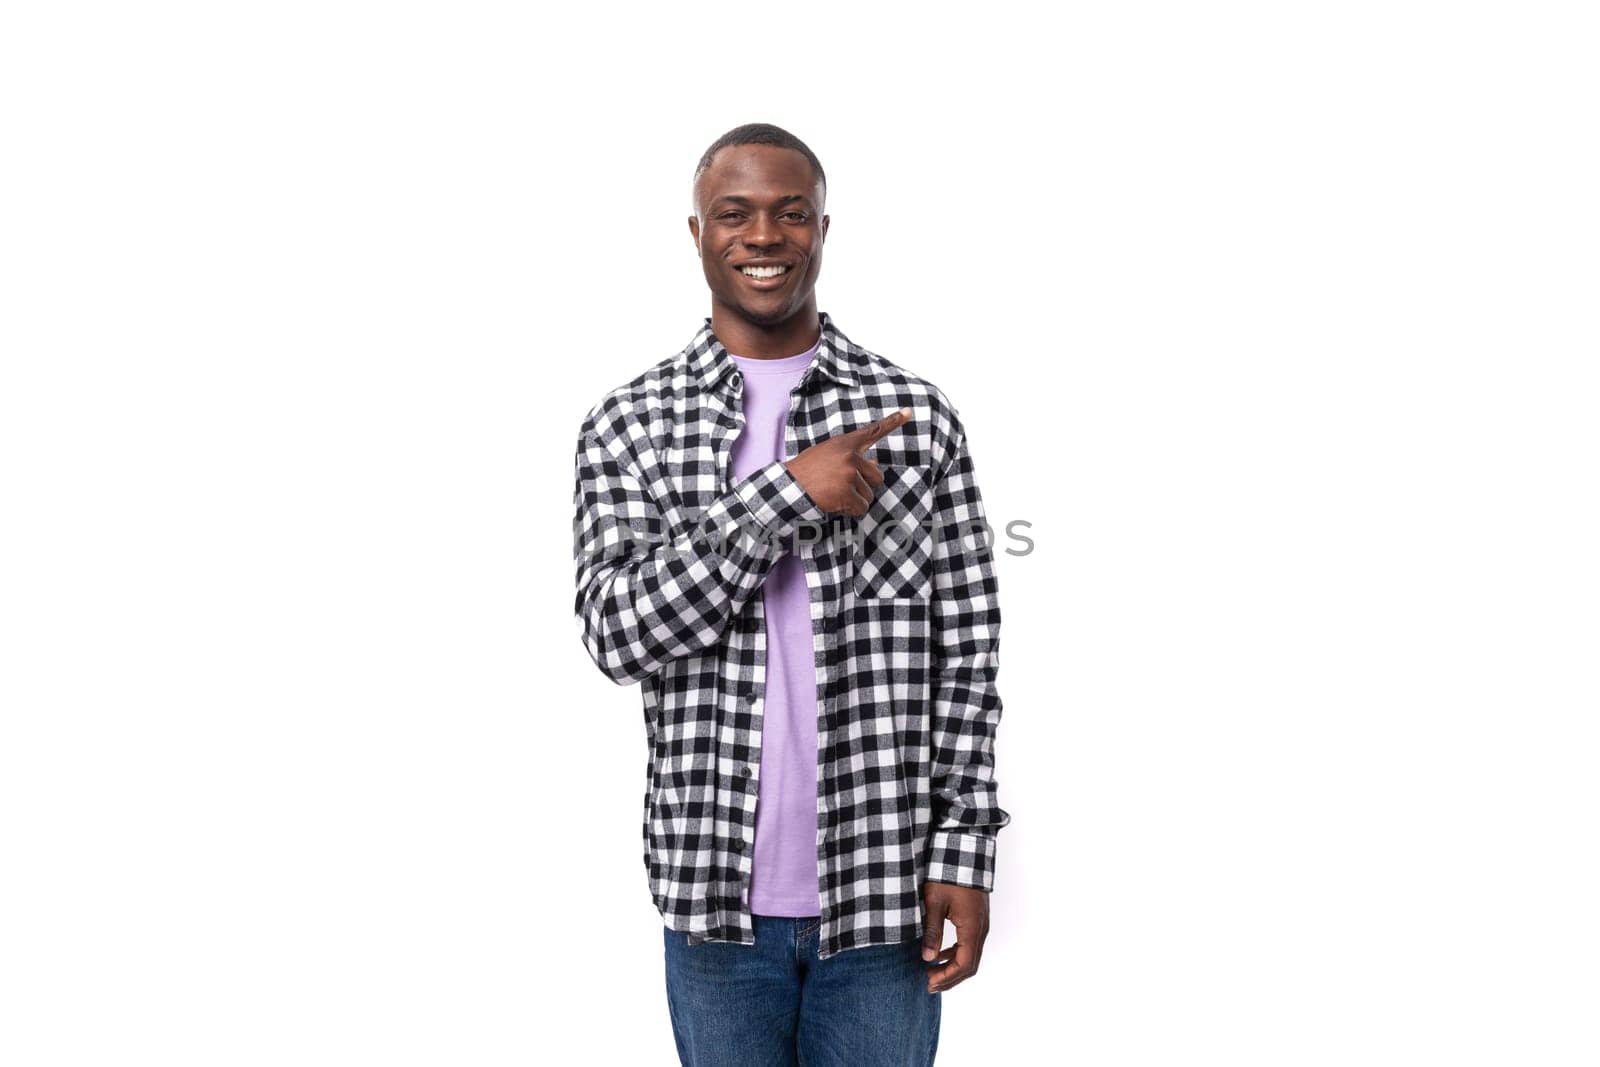 handsome 30 year old african guy dressed in a plaid black and white shirt points with his hand on the background with copy space.